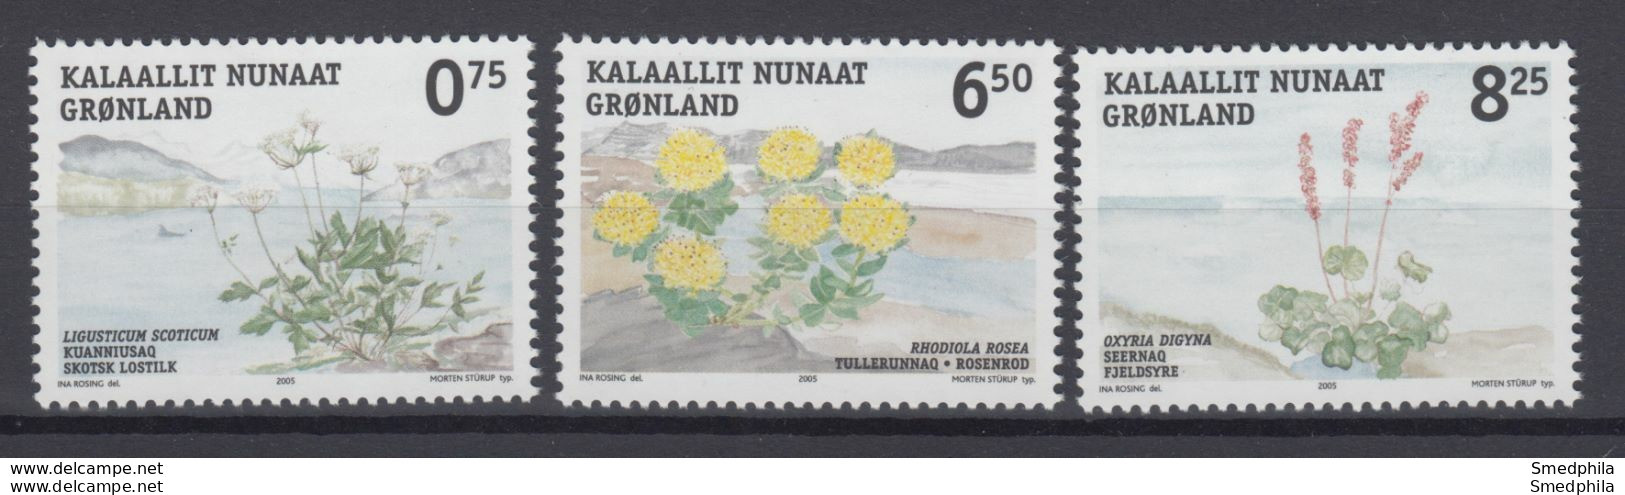 Greenland 2005 - Michel 454-456 MNH ** - Unused Stamps